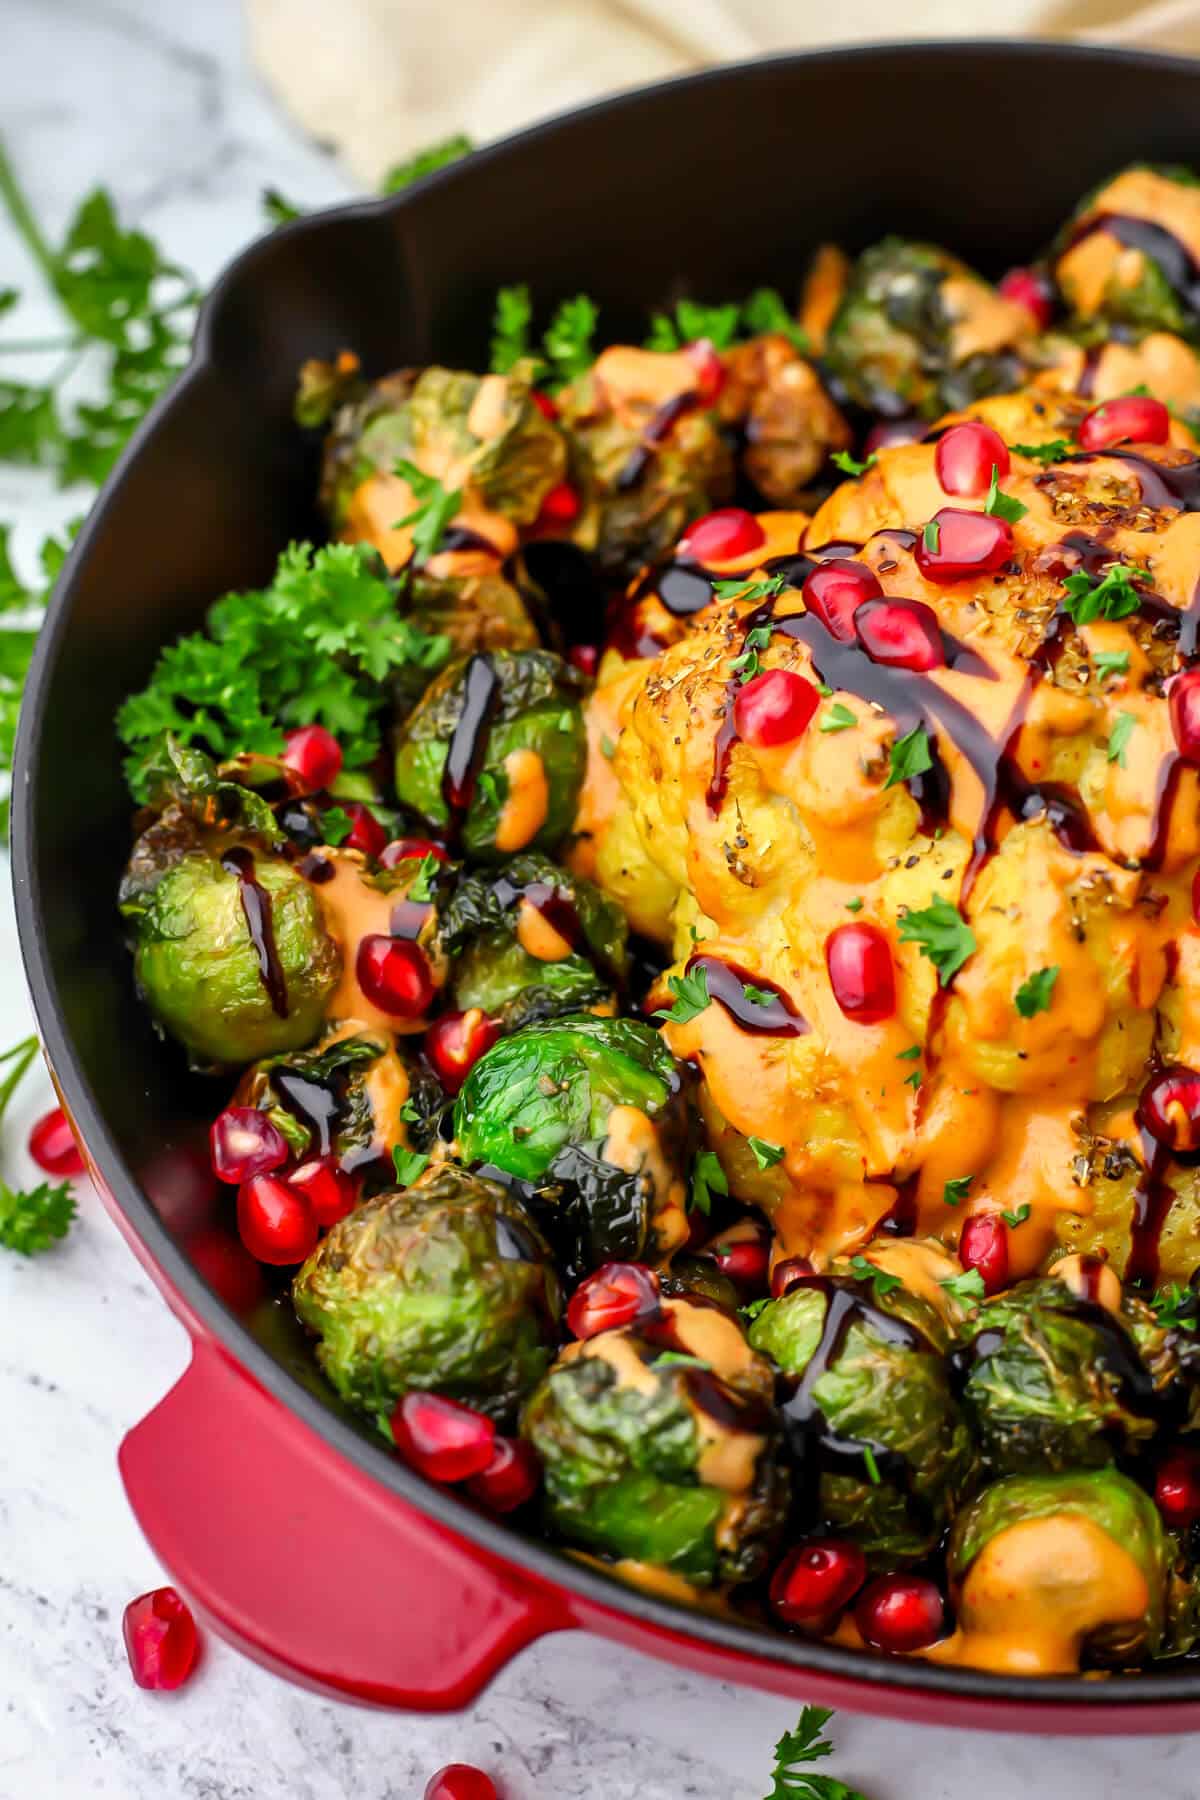 A whole roasted head of cauliflower in a red iron skillet with brussels sprouts around it and drizzled with tahini sauce.